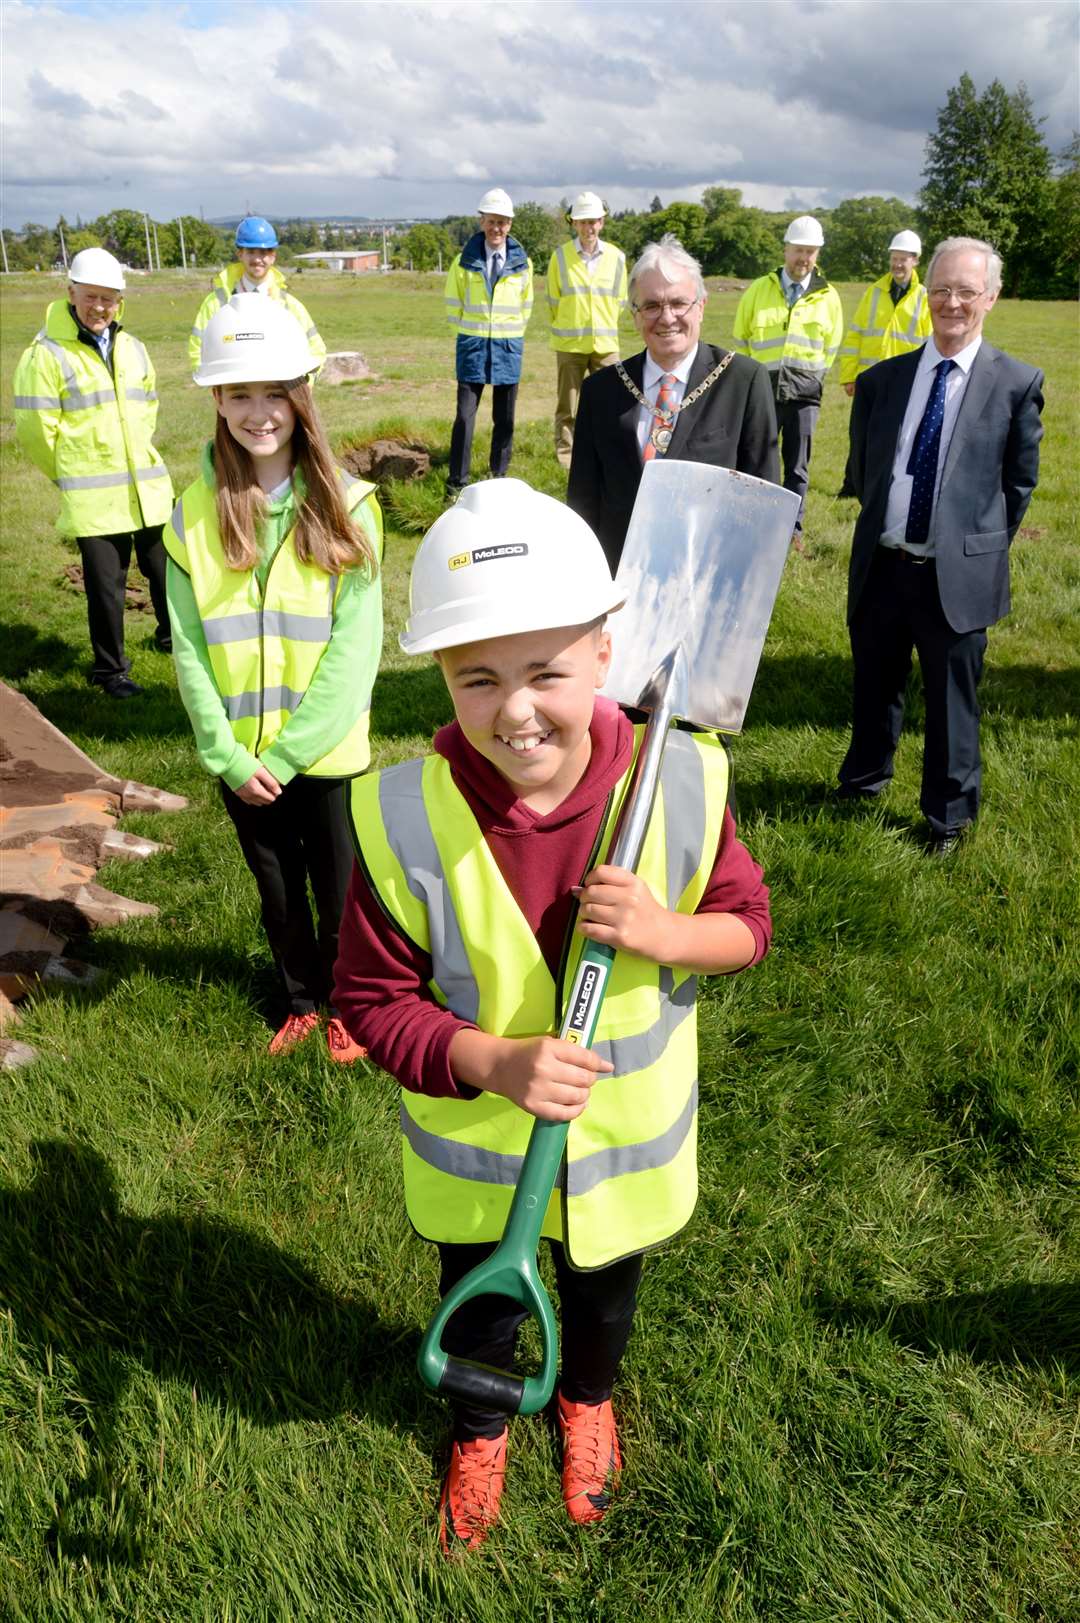 At the sod cutting to mark the start of the second stage of the West Link Road there were two special guests. Kinmylies Primary school house captains Reece Fraser and Emily Mackenzie helped start the digging along with Inverness Depute Provost Graham Ross and Councillor Allan Henderson. Also pictured are members of the project team from RJ Mcleod and Highland Council...Picture: Gair Fraser. Image No. 044088.